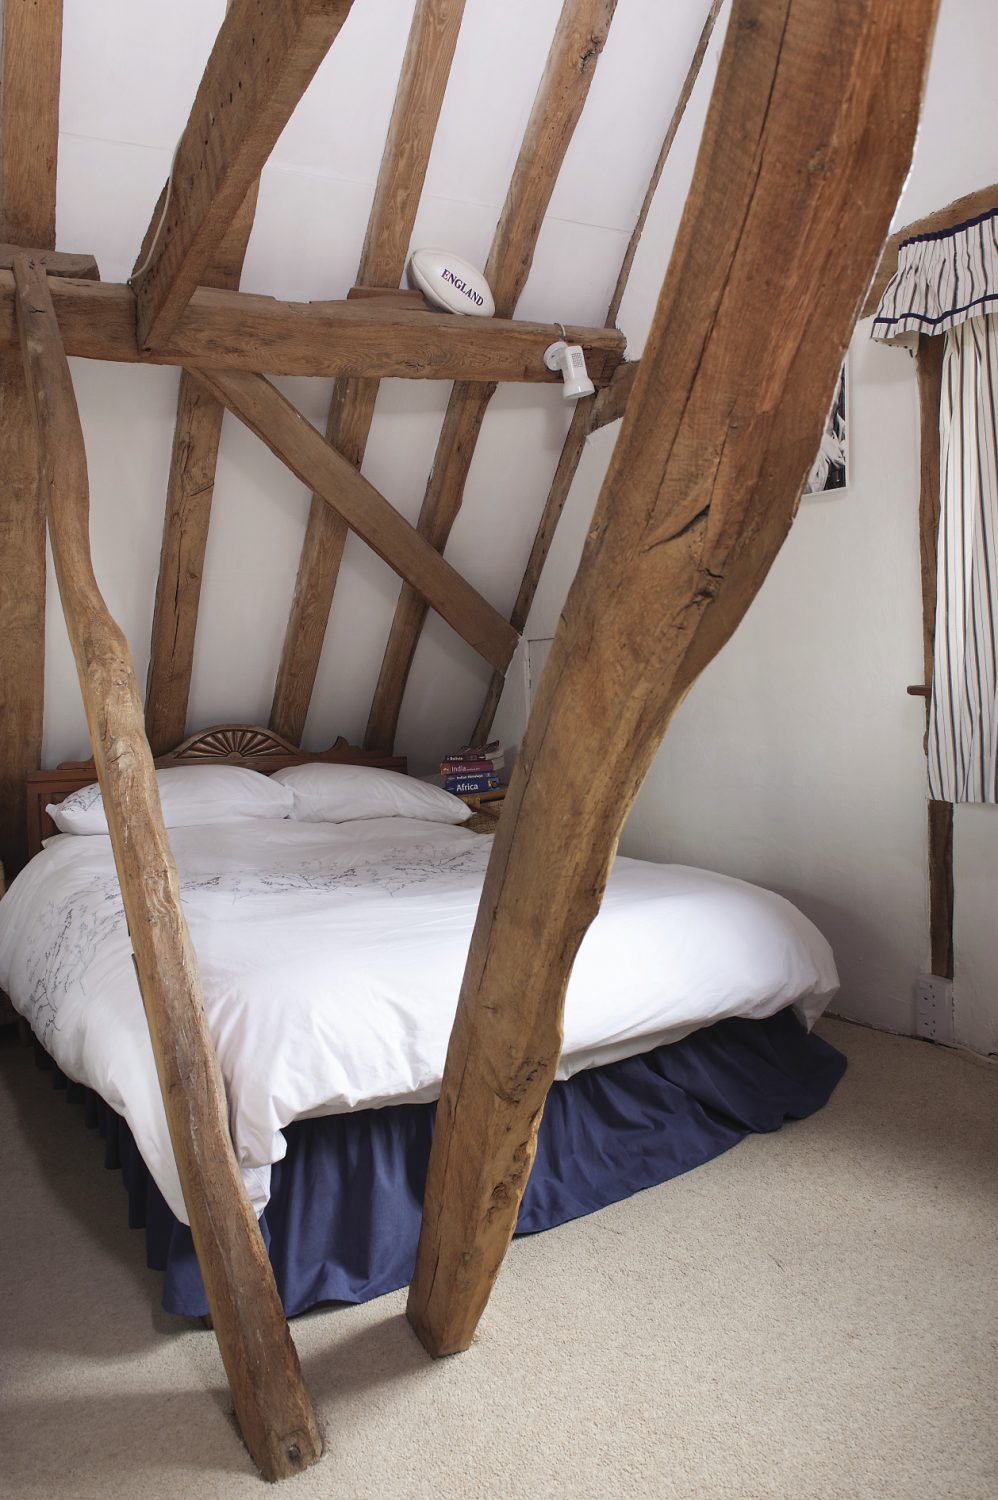 At the top of the house, the couple’s son’s room displays more of David’s craftsmanship. The floor here careers away from the window towards the door at such an angle that one leg of the bed is almost half the height of the other